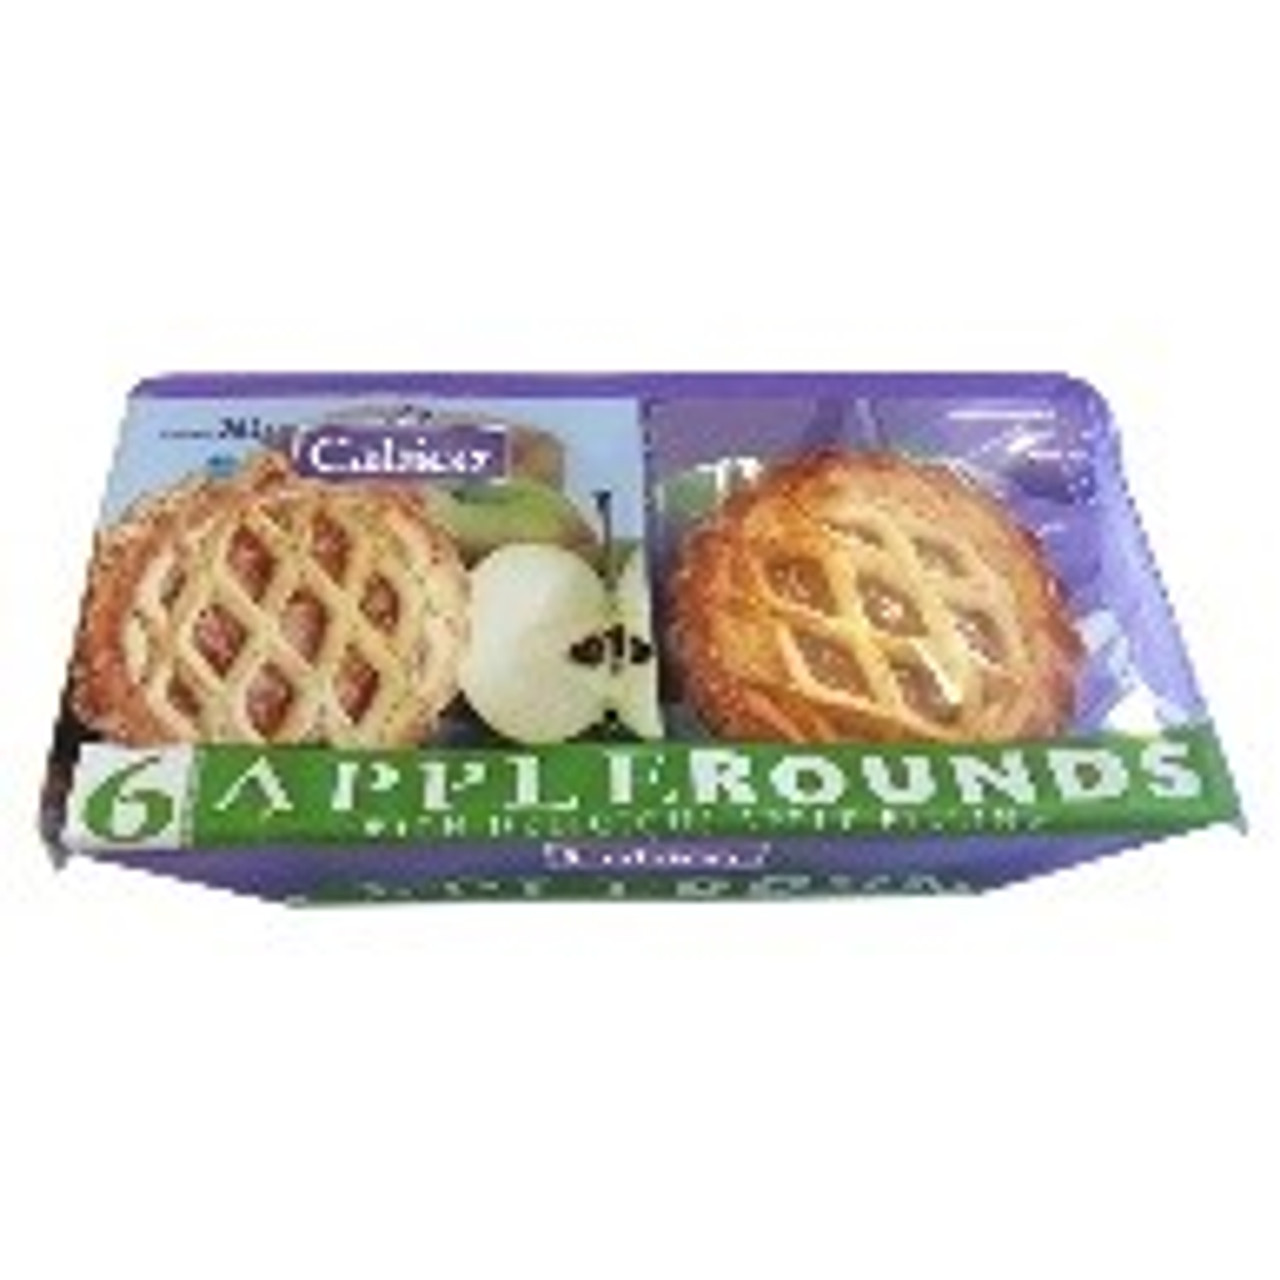 Cabico 6 Apple Rounds 264g (Dec 23 - Jan 24) RRP 1.79 CLEARANCE XL 0.89 or 2 for 1.50